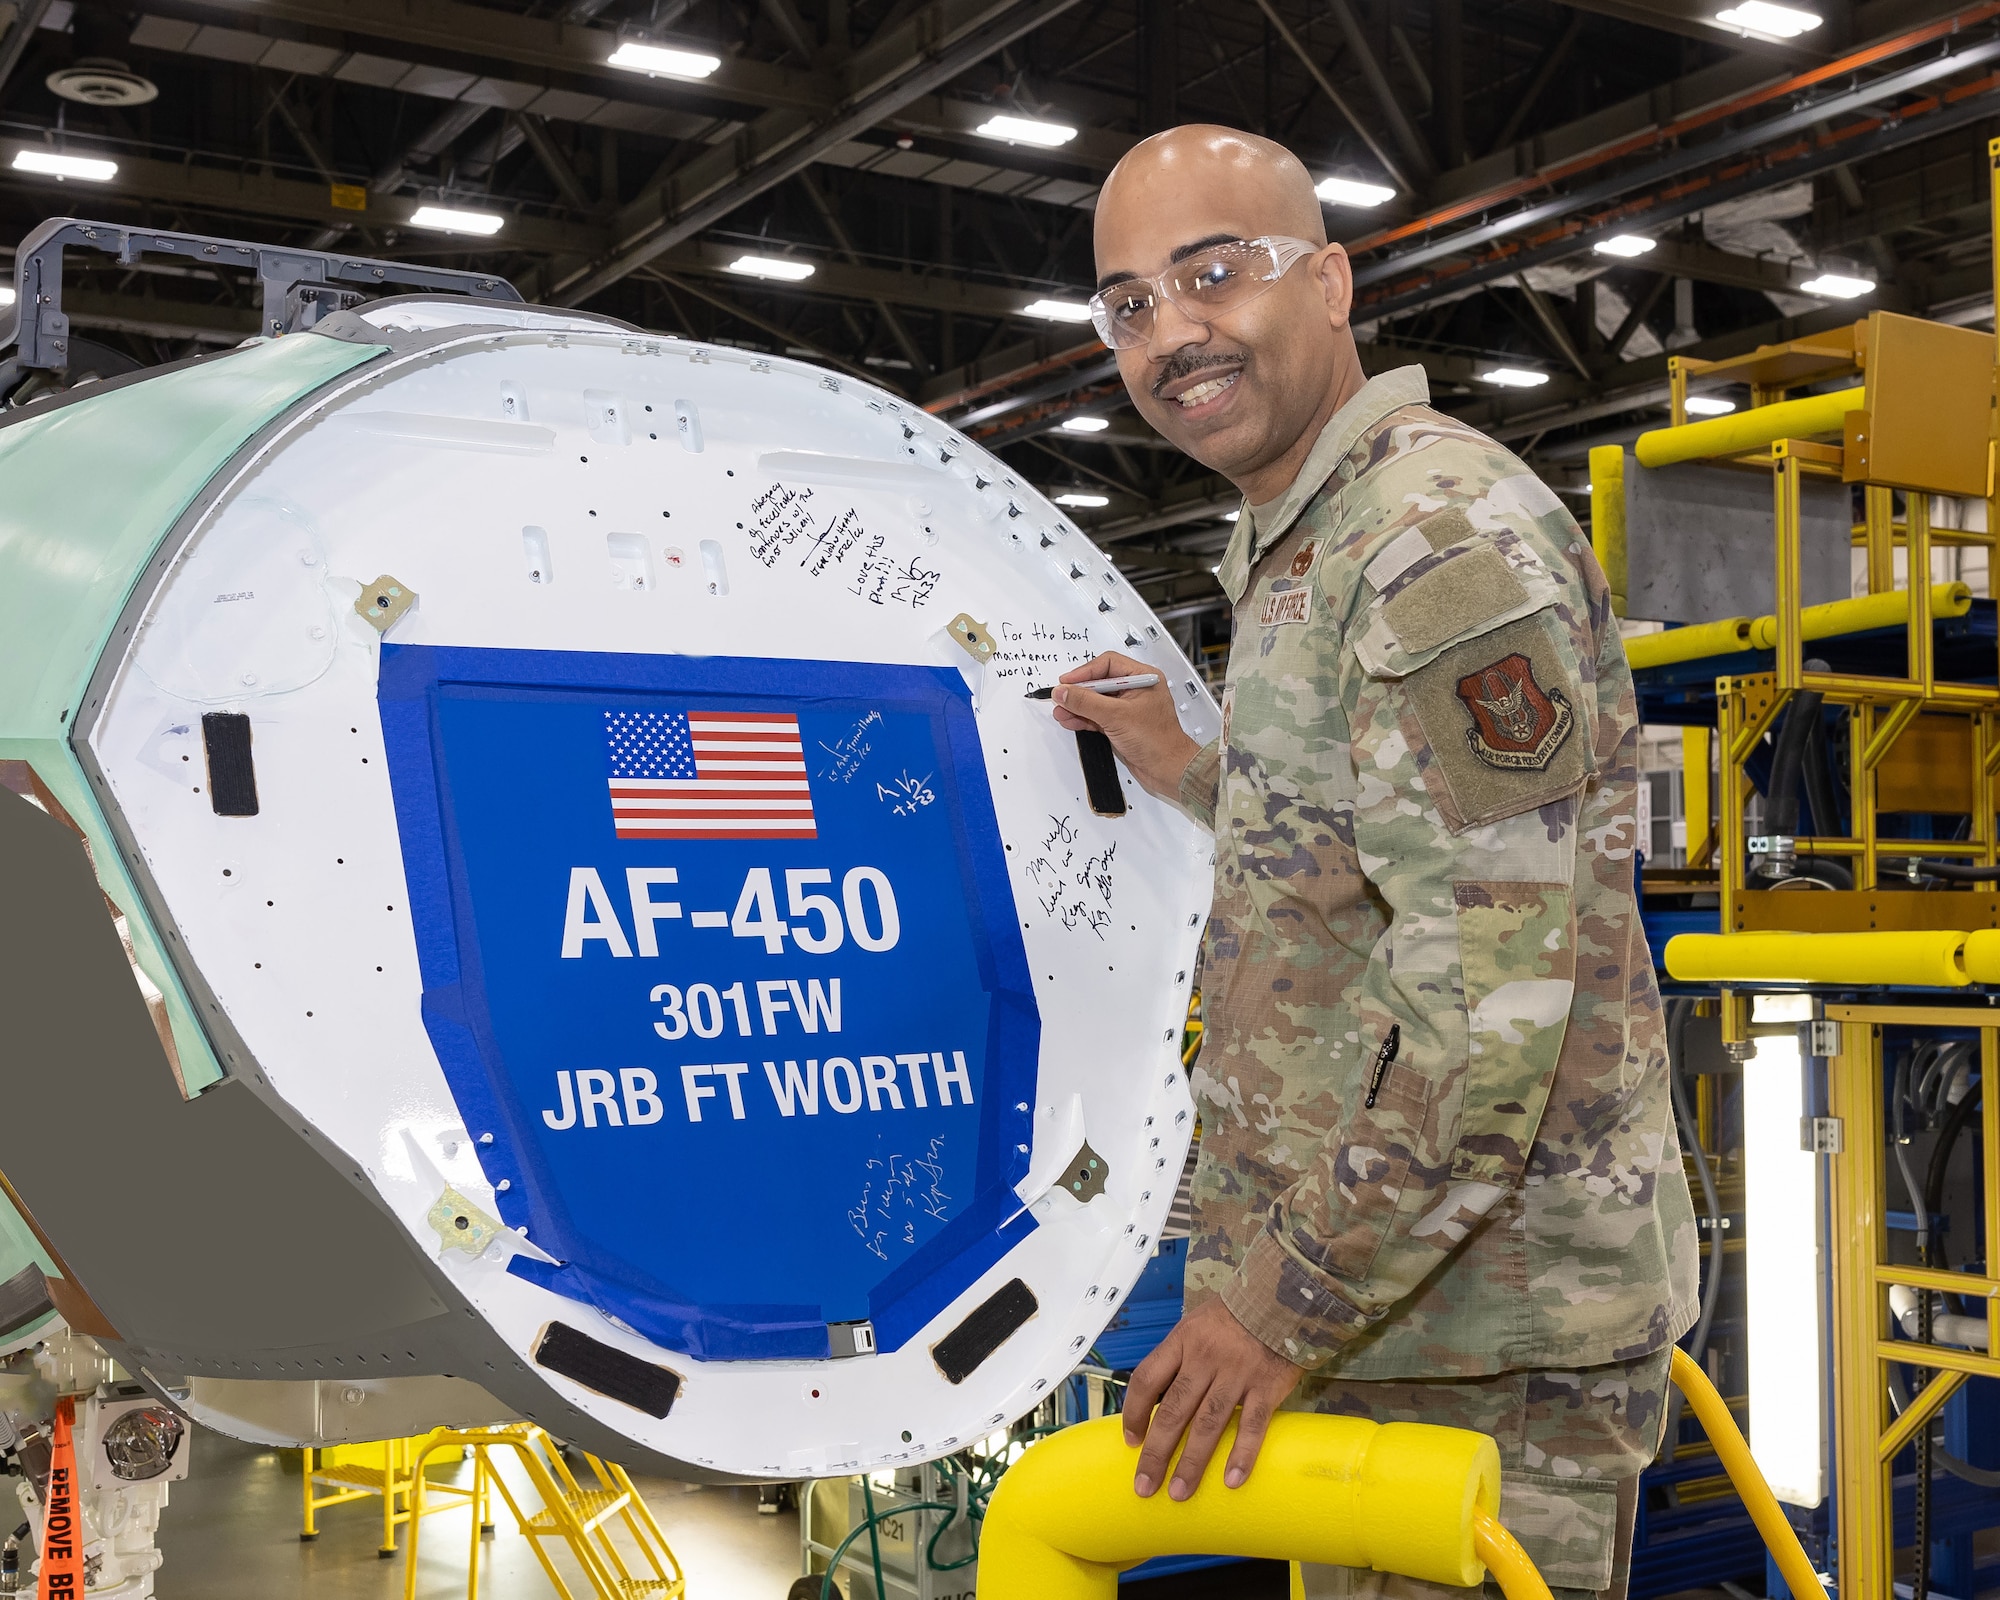 Air Force Reserve Command Chief Master Sgt. Israel Nunez etches his name on the inaugural F-35 Lightning II for the 301st Fighter Wing, affirming the enlisted force's pivotal role in ushering in a new era of airpower and readiness for Air Force Reserve Command. (Photos courtesy of Lockheed Martin Aeronautics Company)